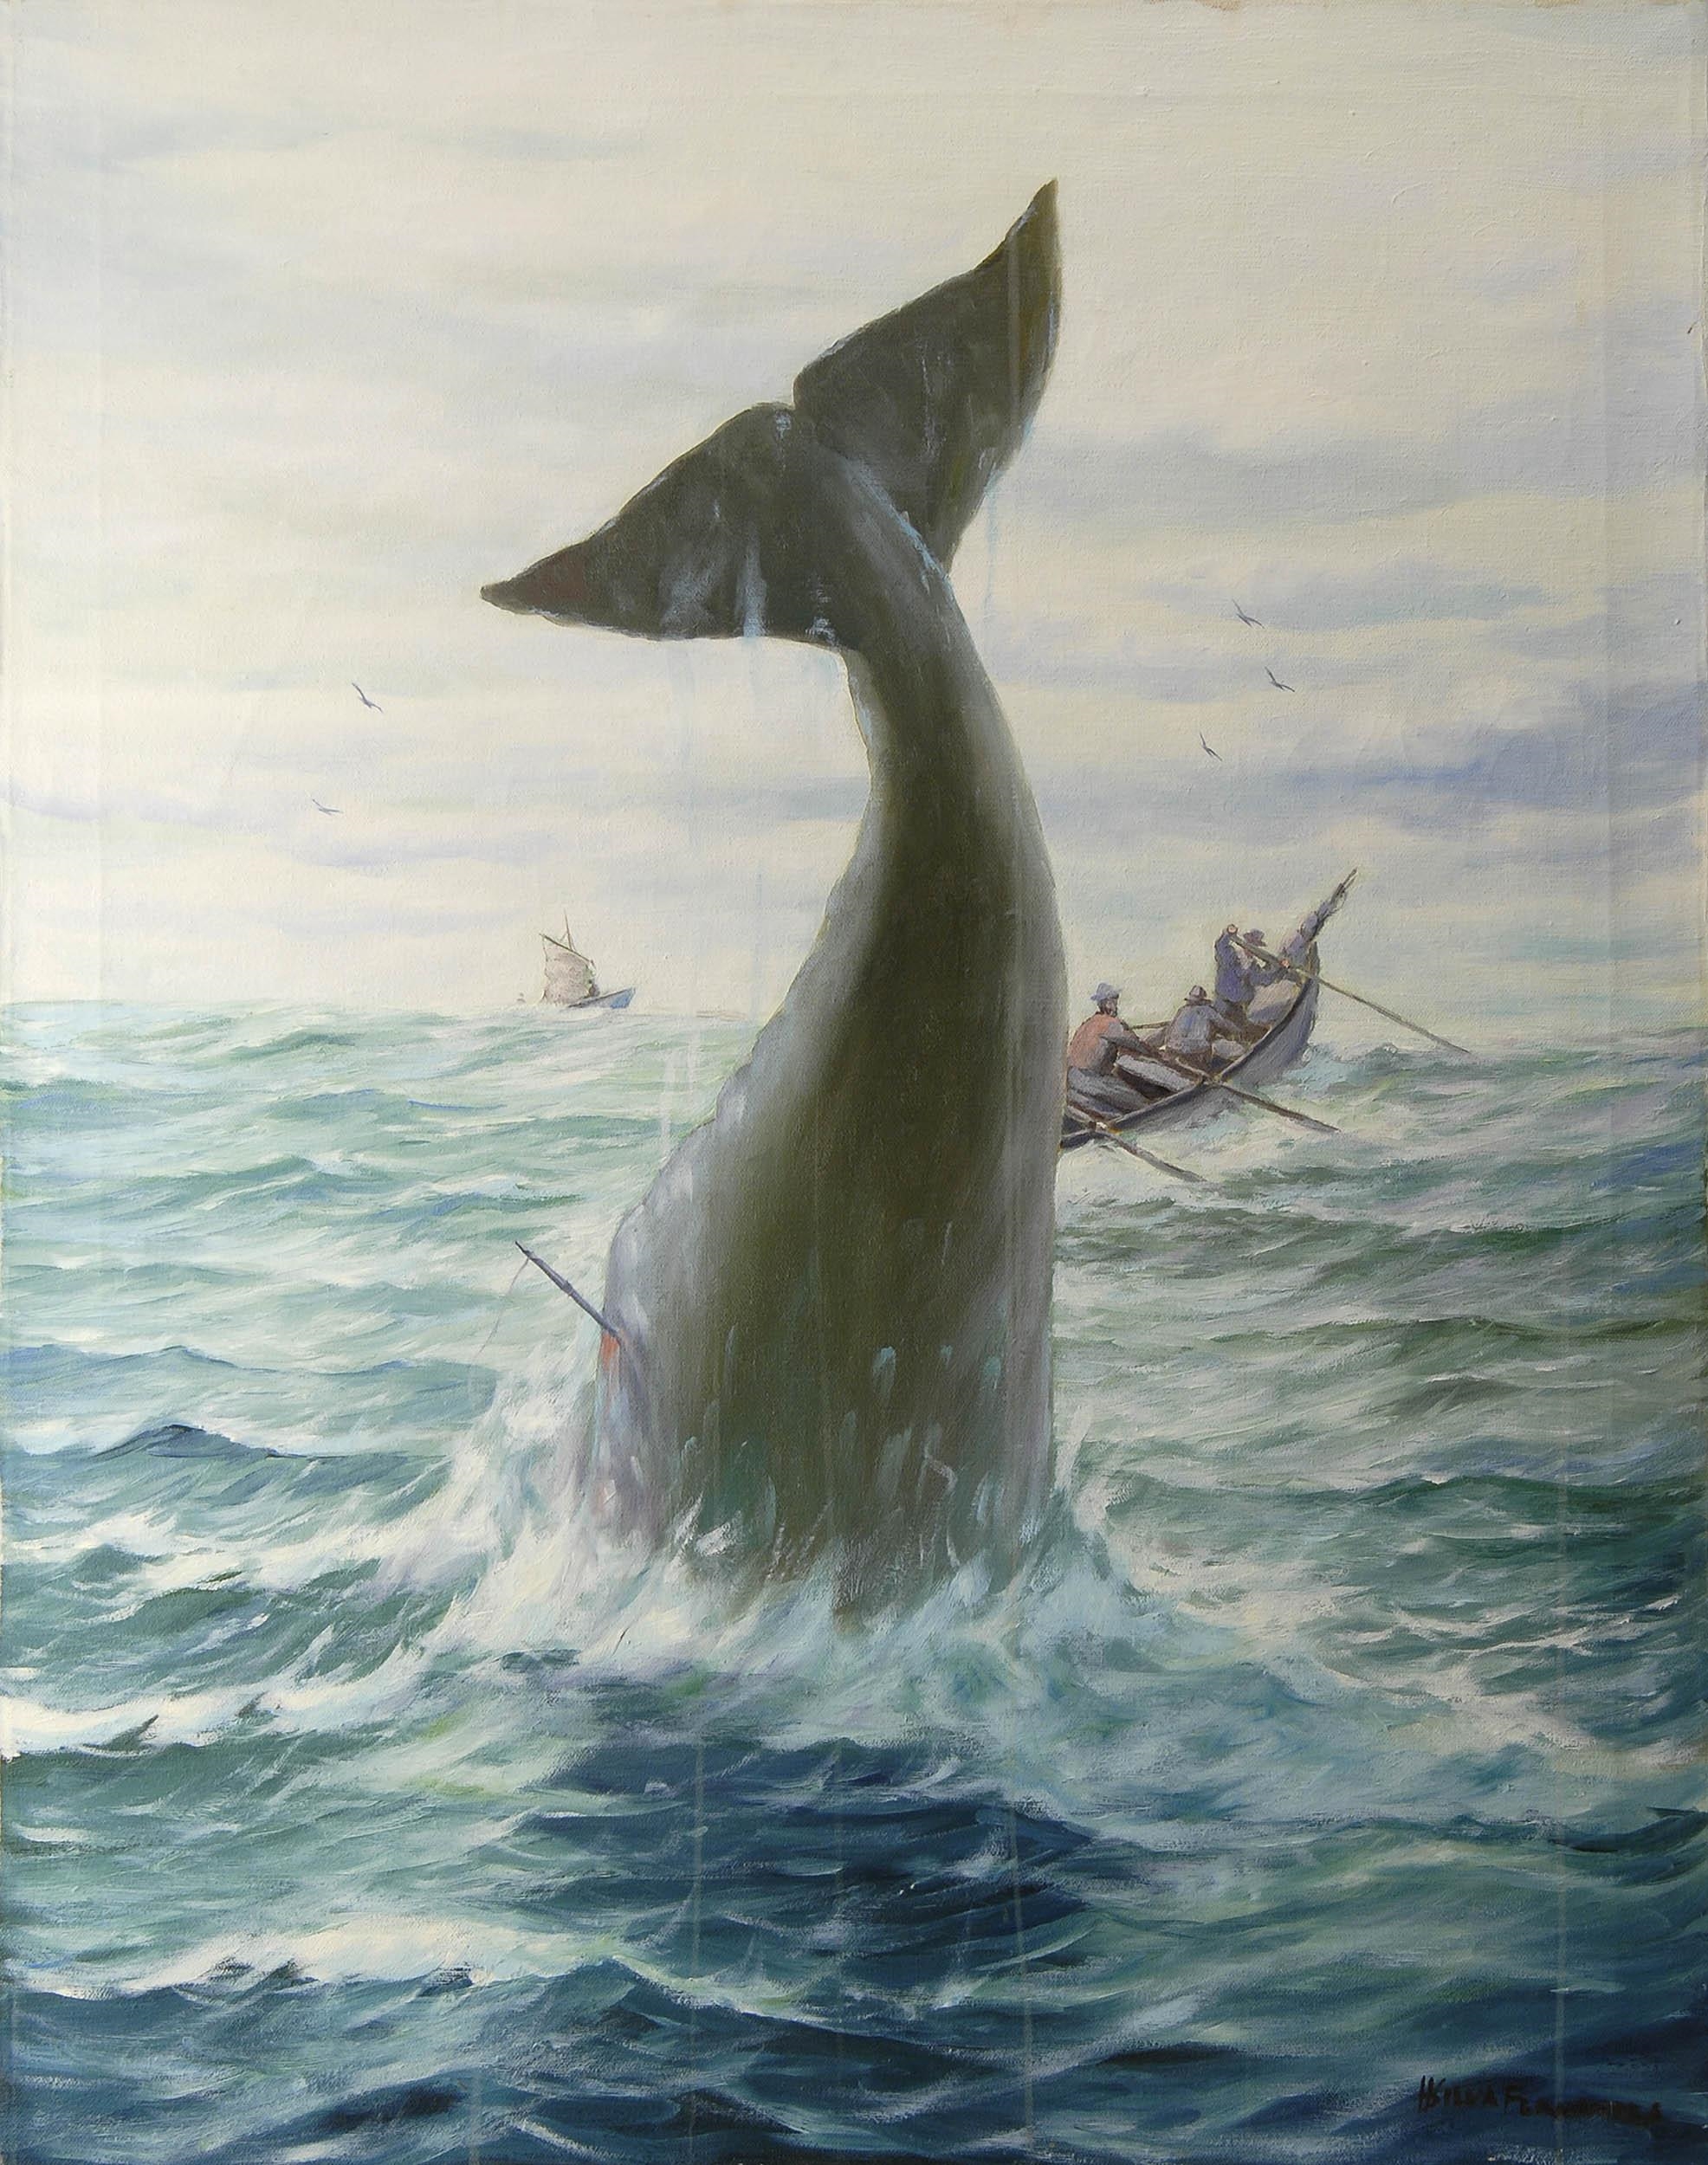 A whale dives after being harpooned by H. Silva Fernandes